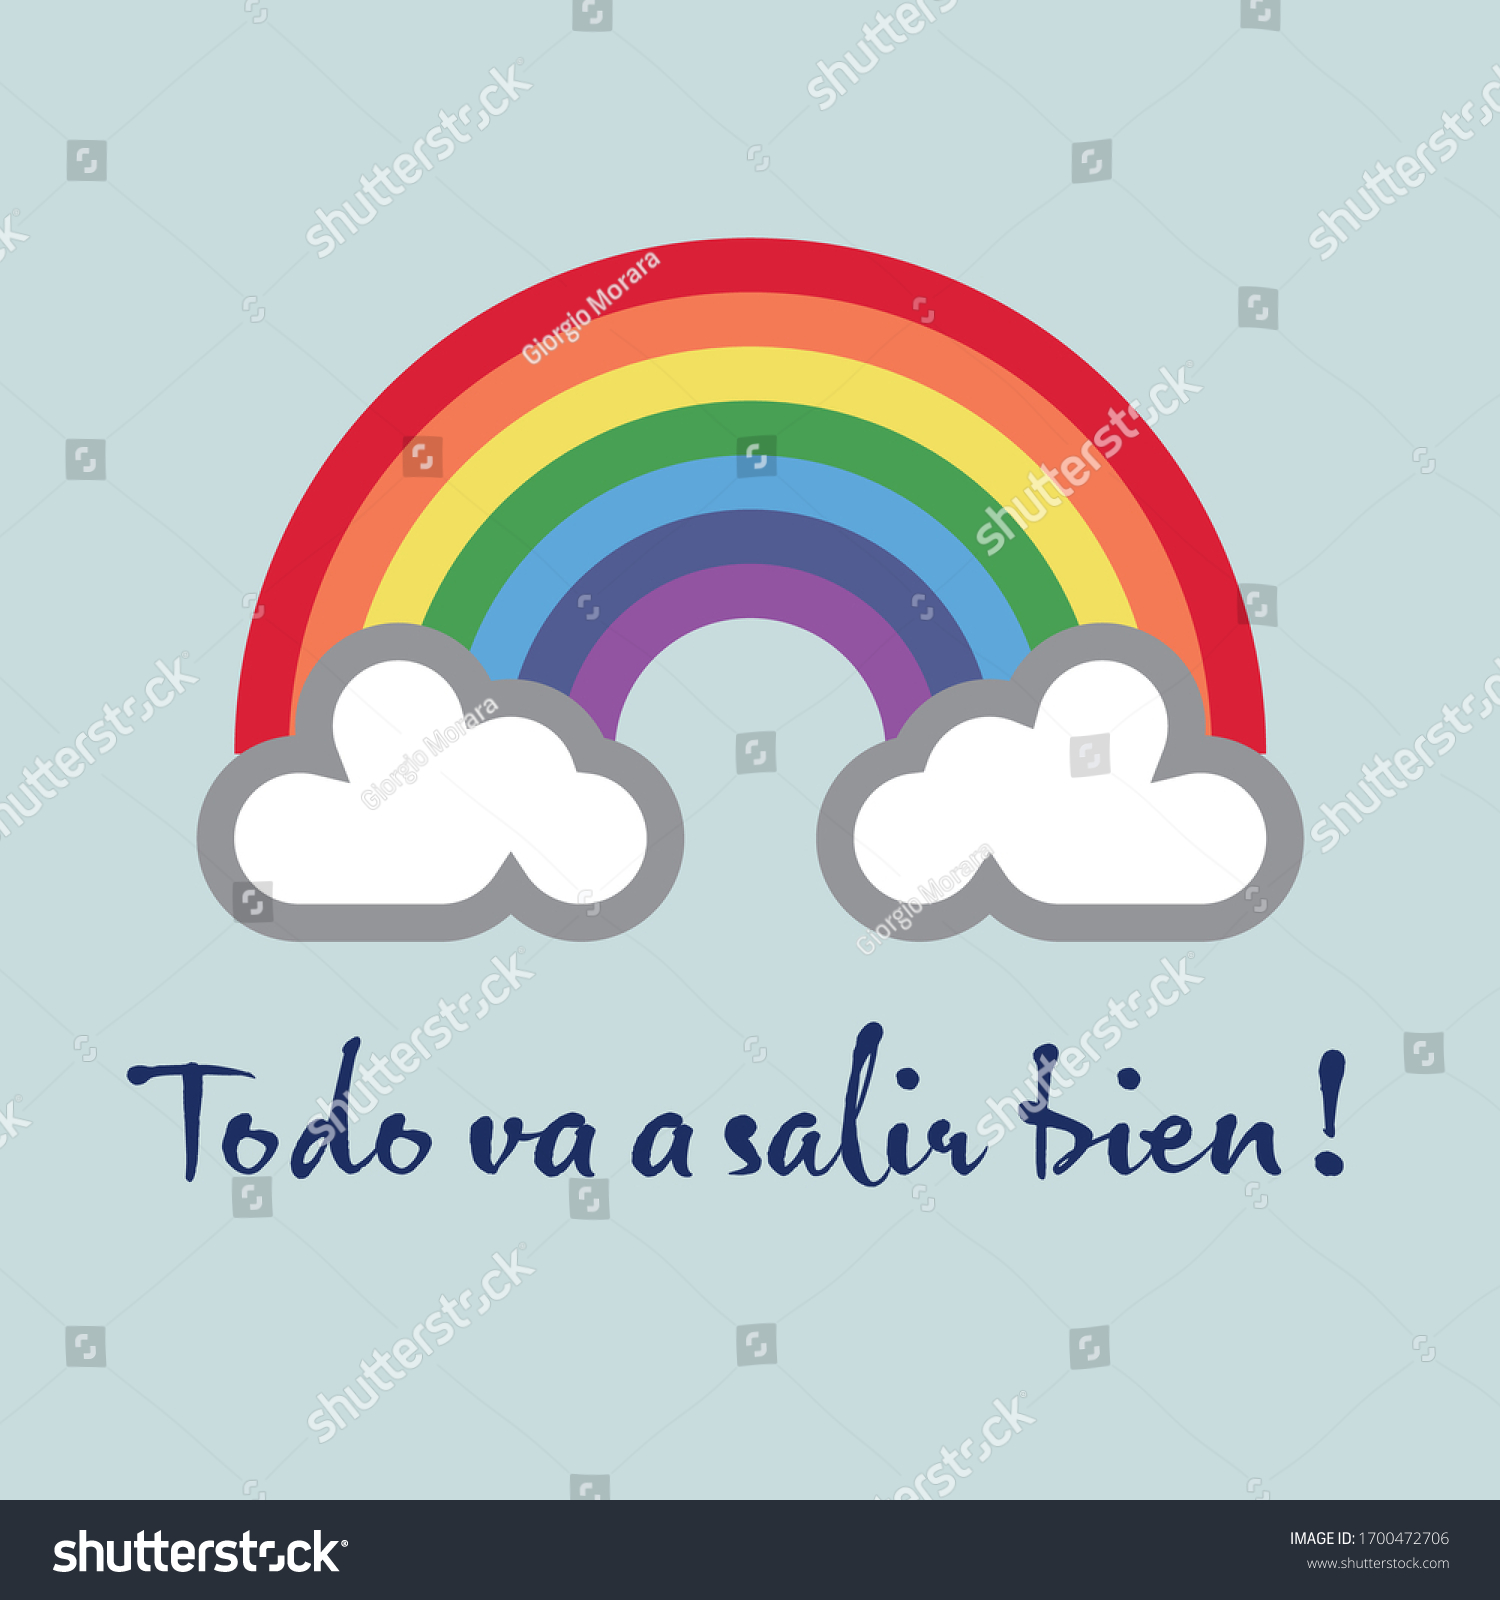 A rainbow for hope and wish: Todo va a salir bien - Everything gonna be alright #1700472706